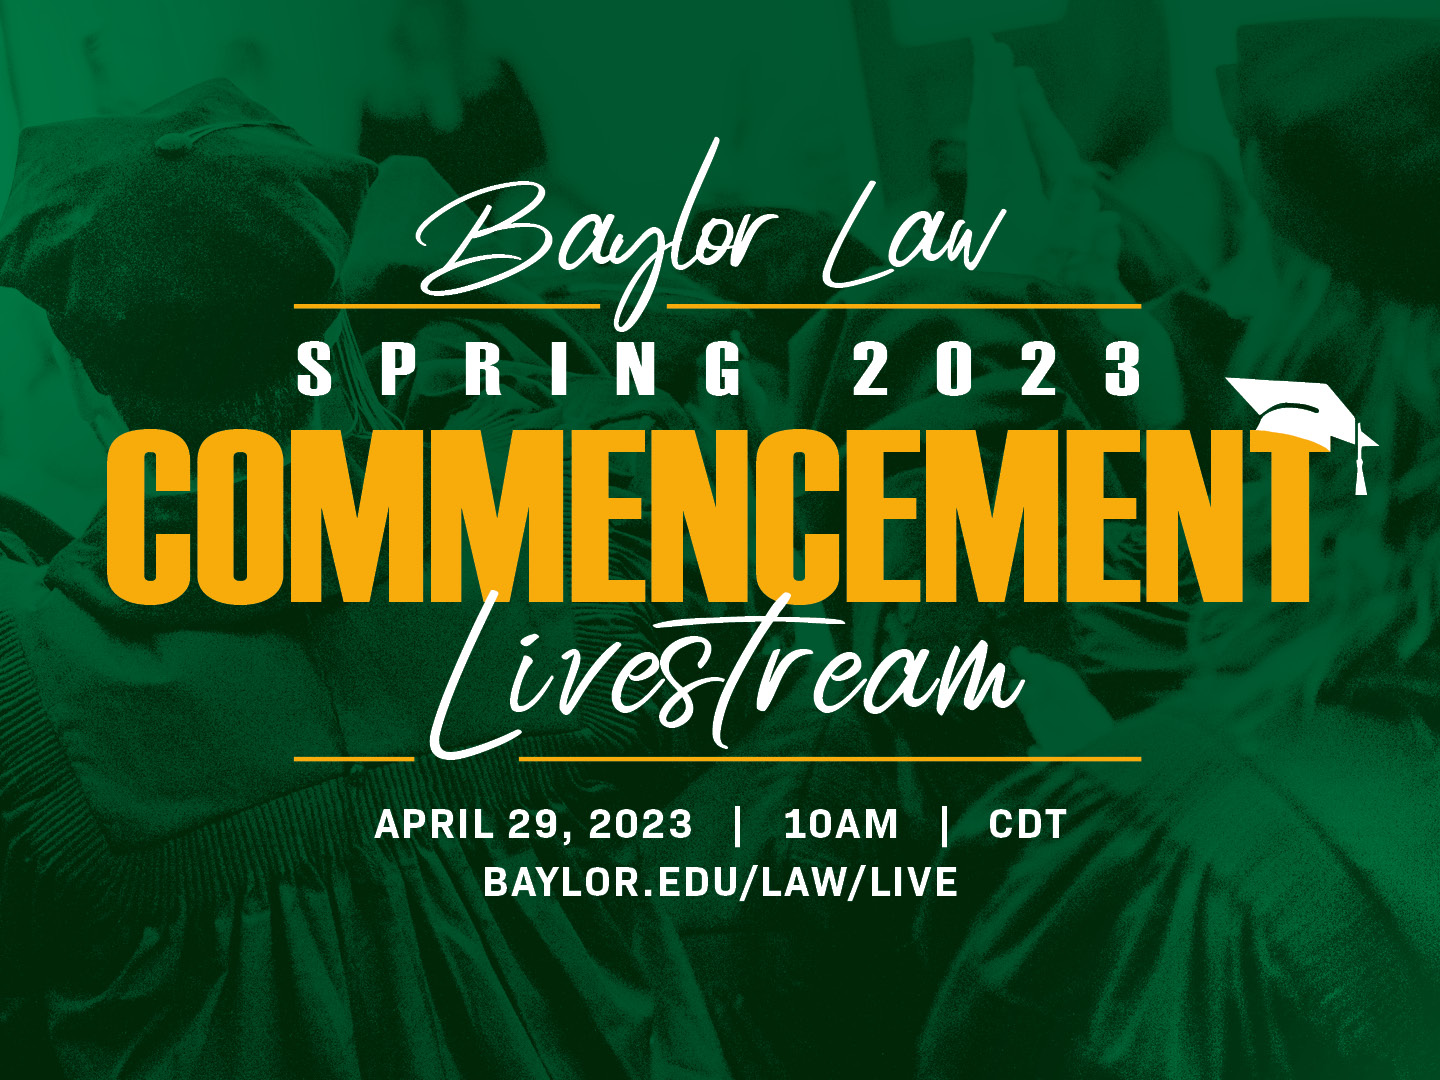 Spring 2023 - Commencement Ceremony